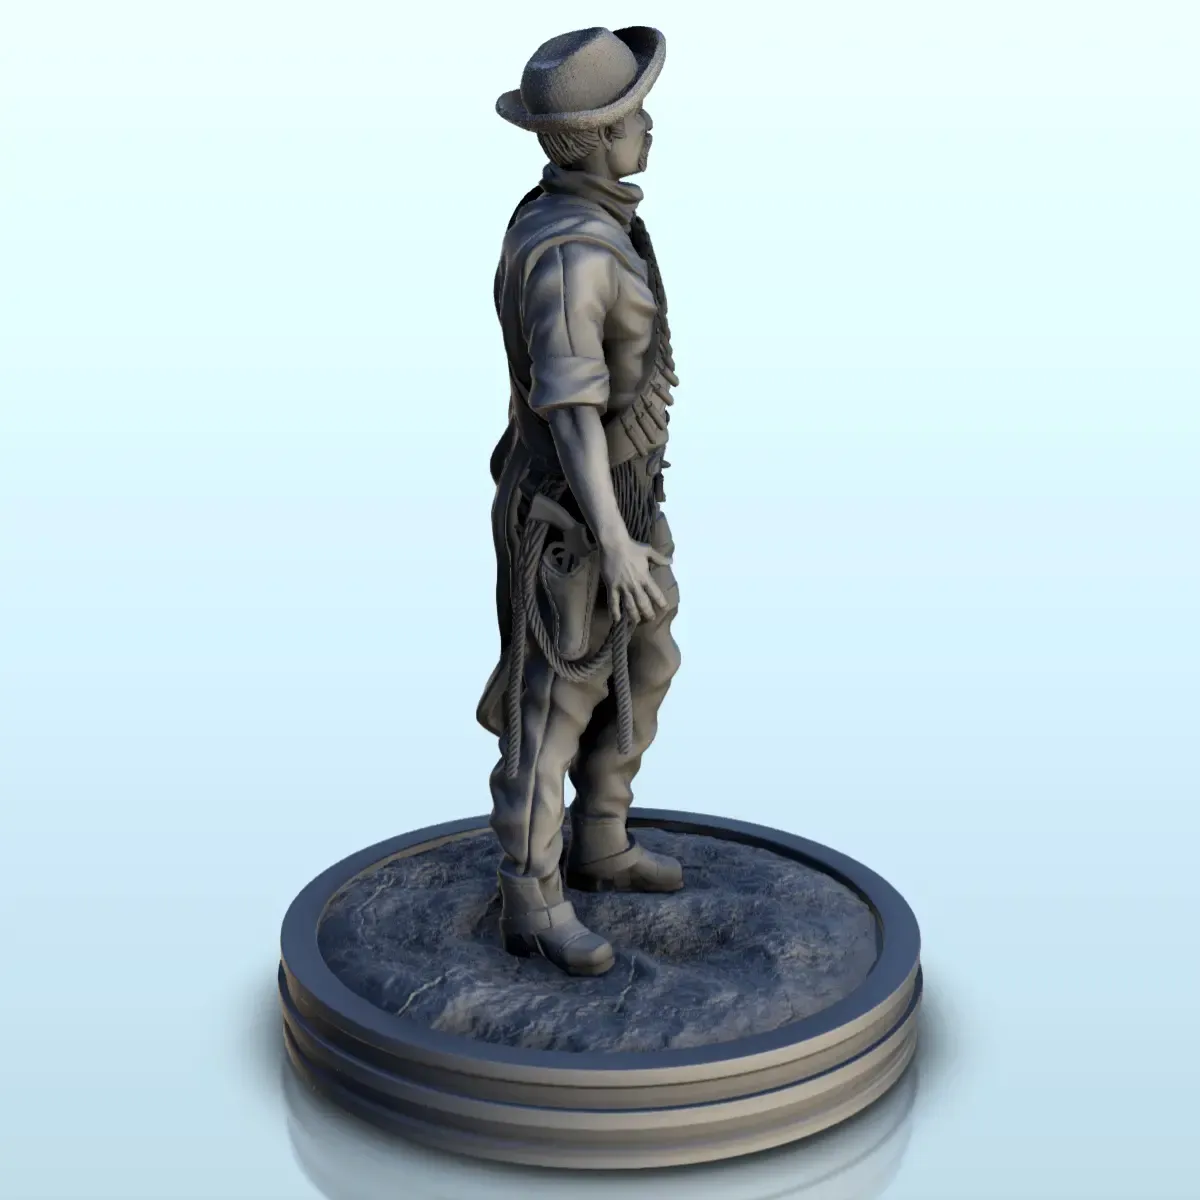 Man with hat and cape (24) - Old West Figure miniature